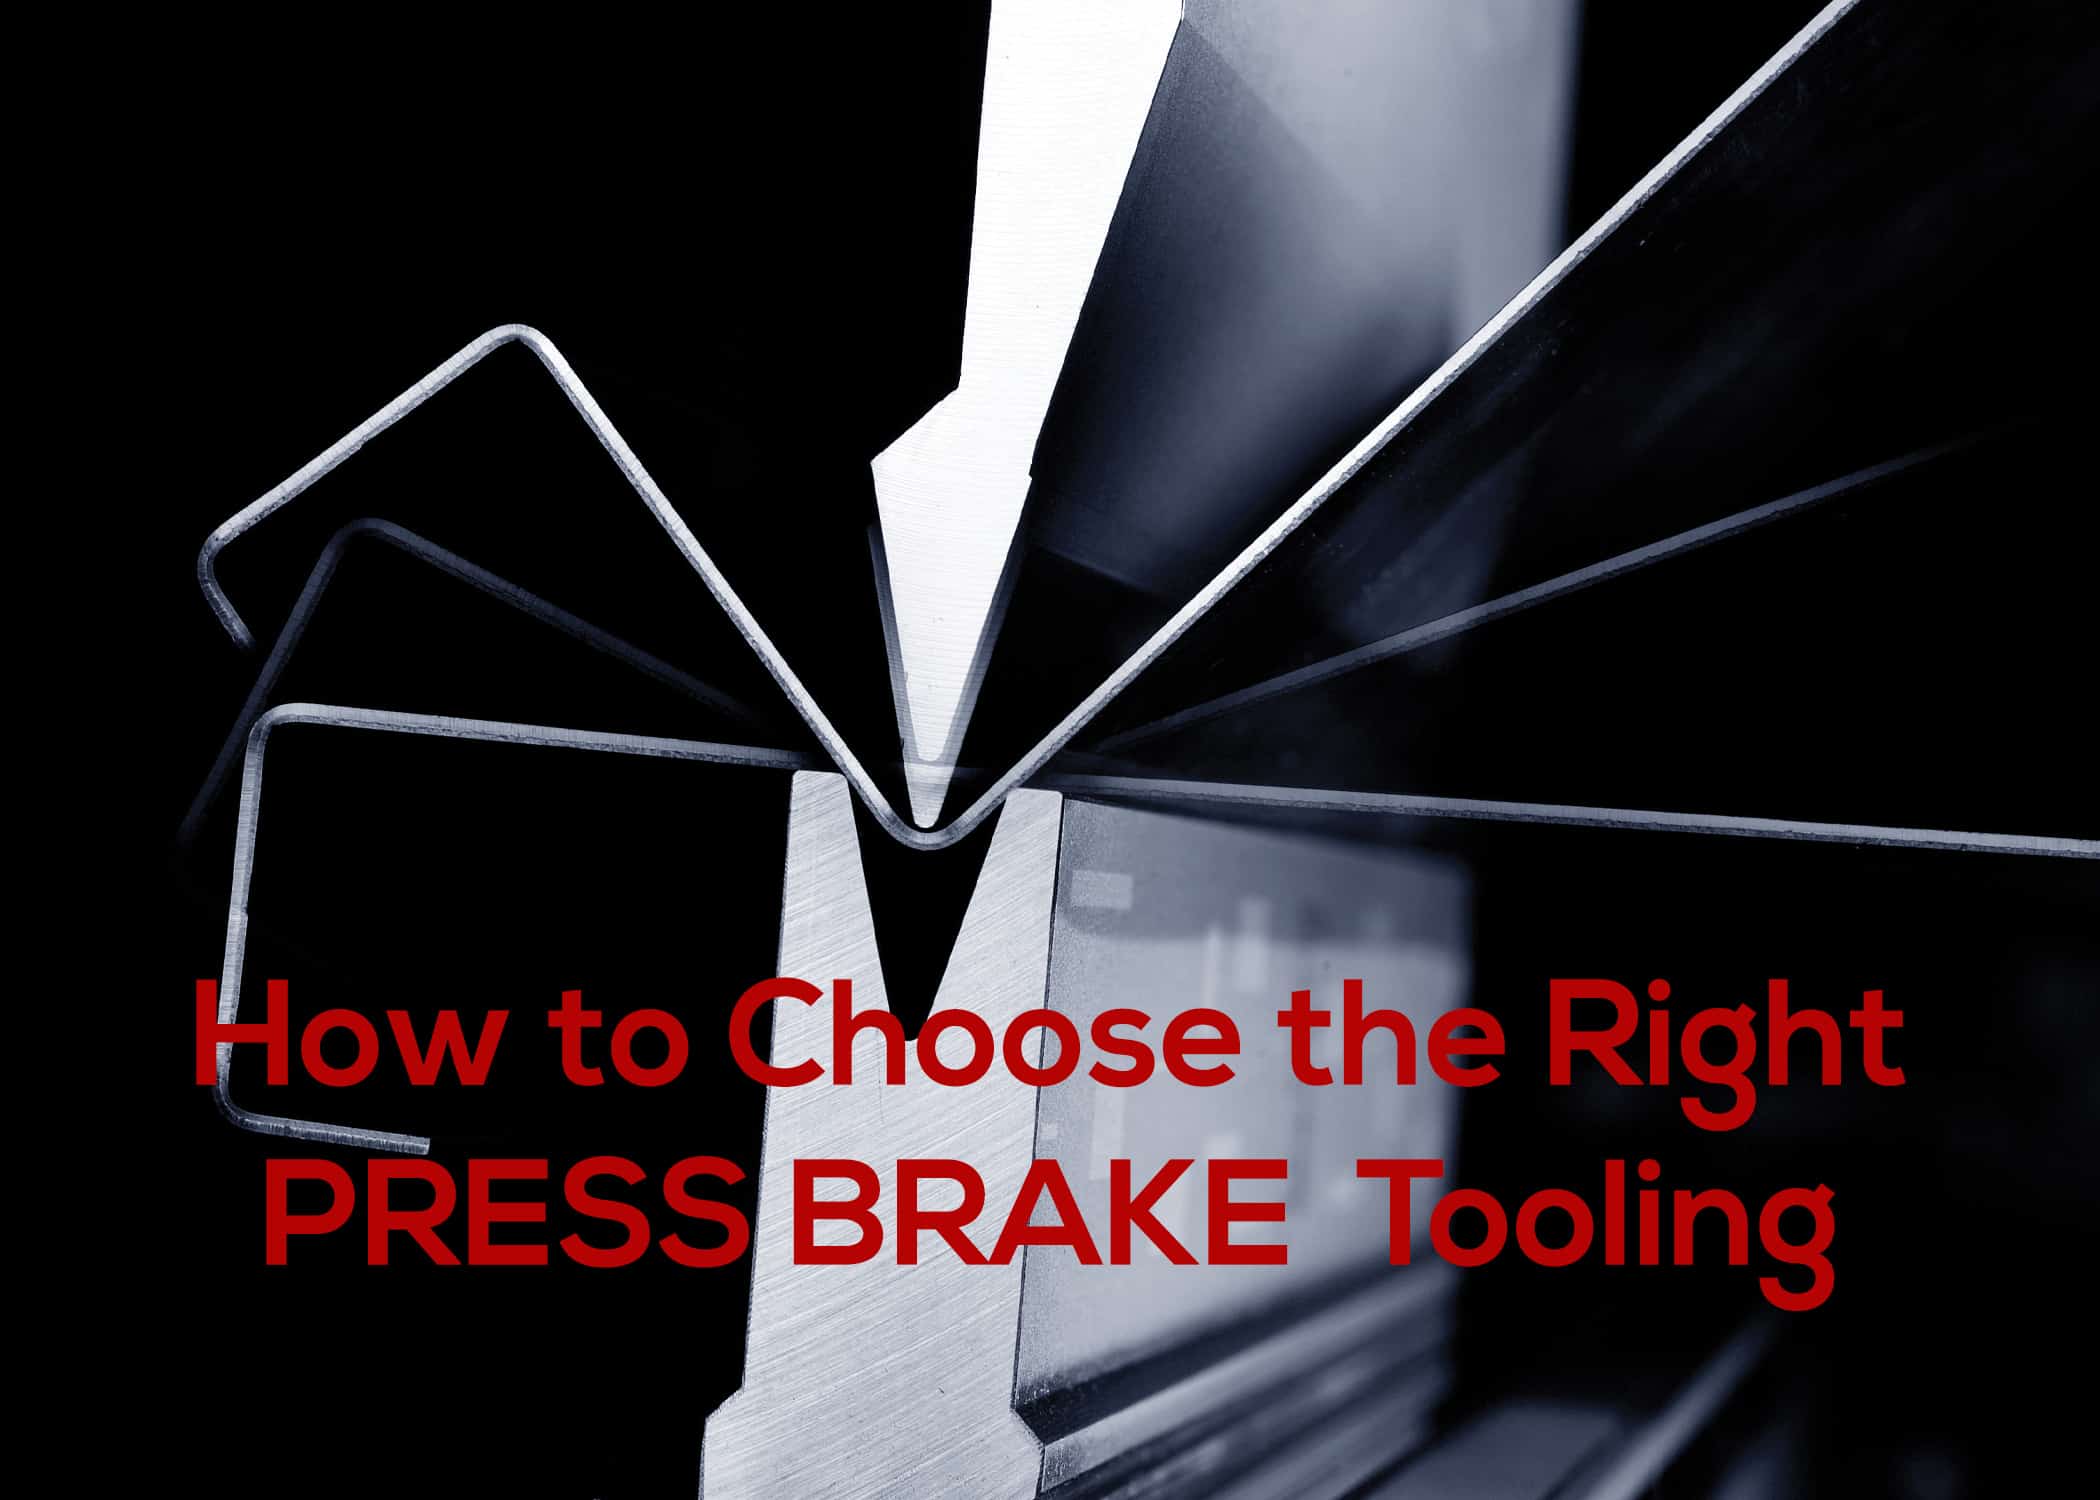 How to Choose the Right Press Brake Tooling